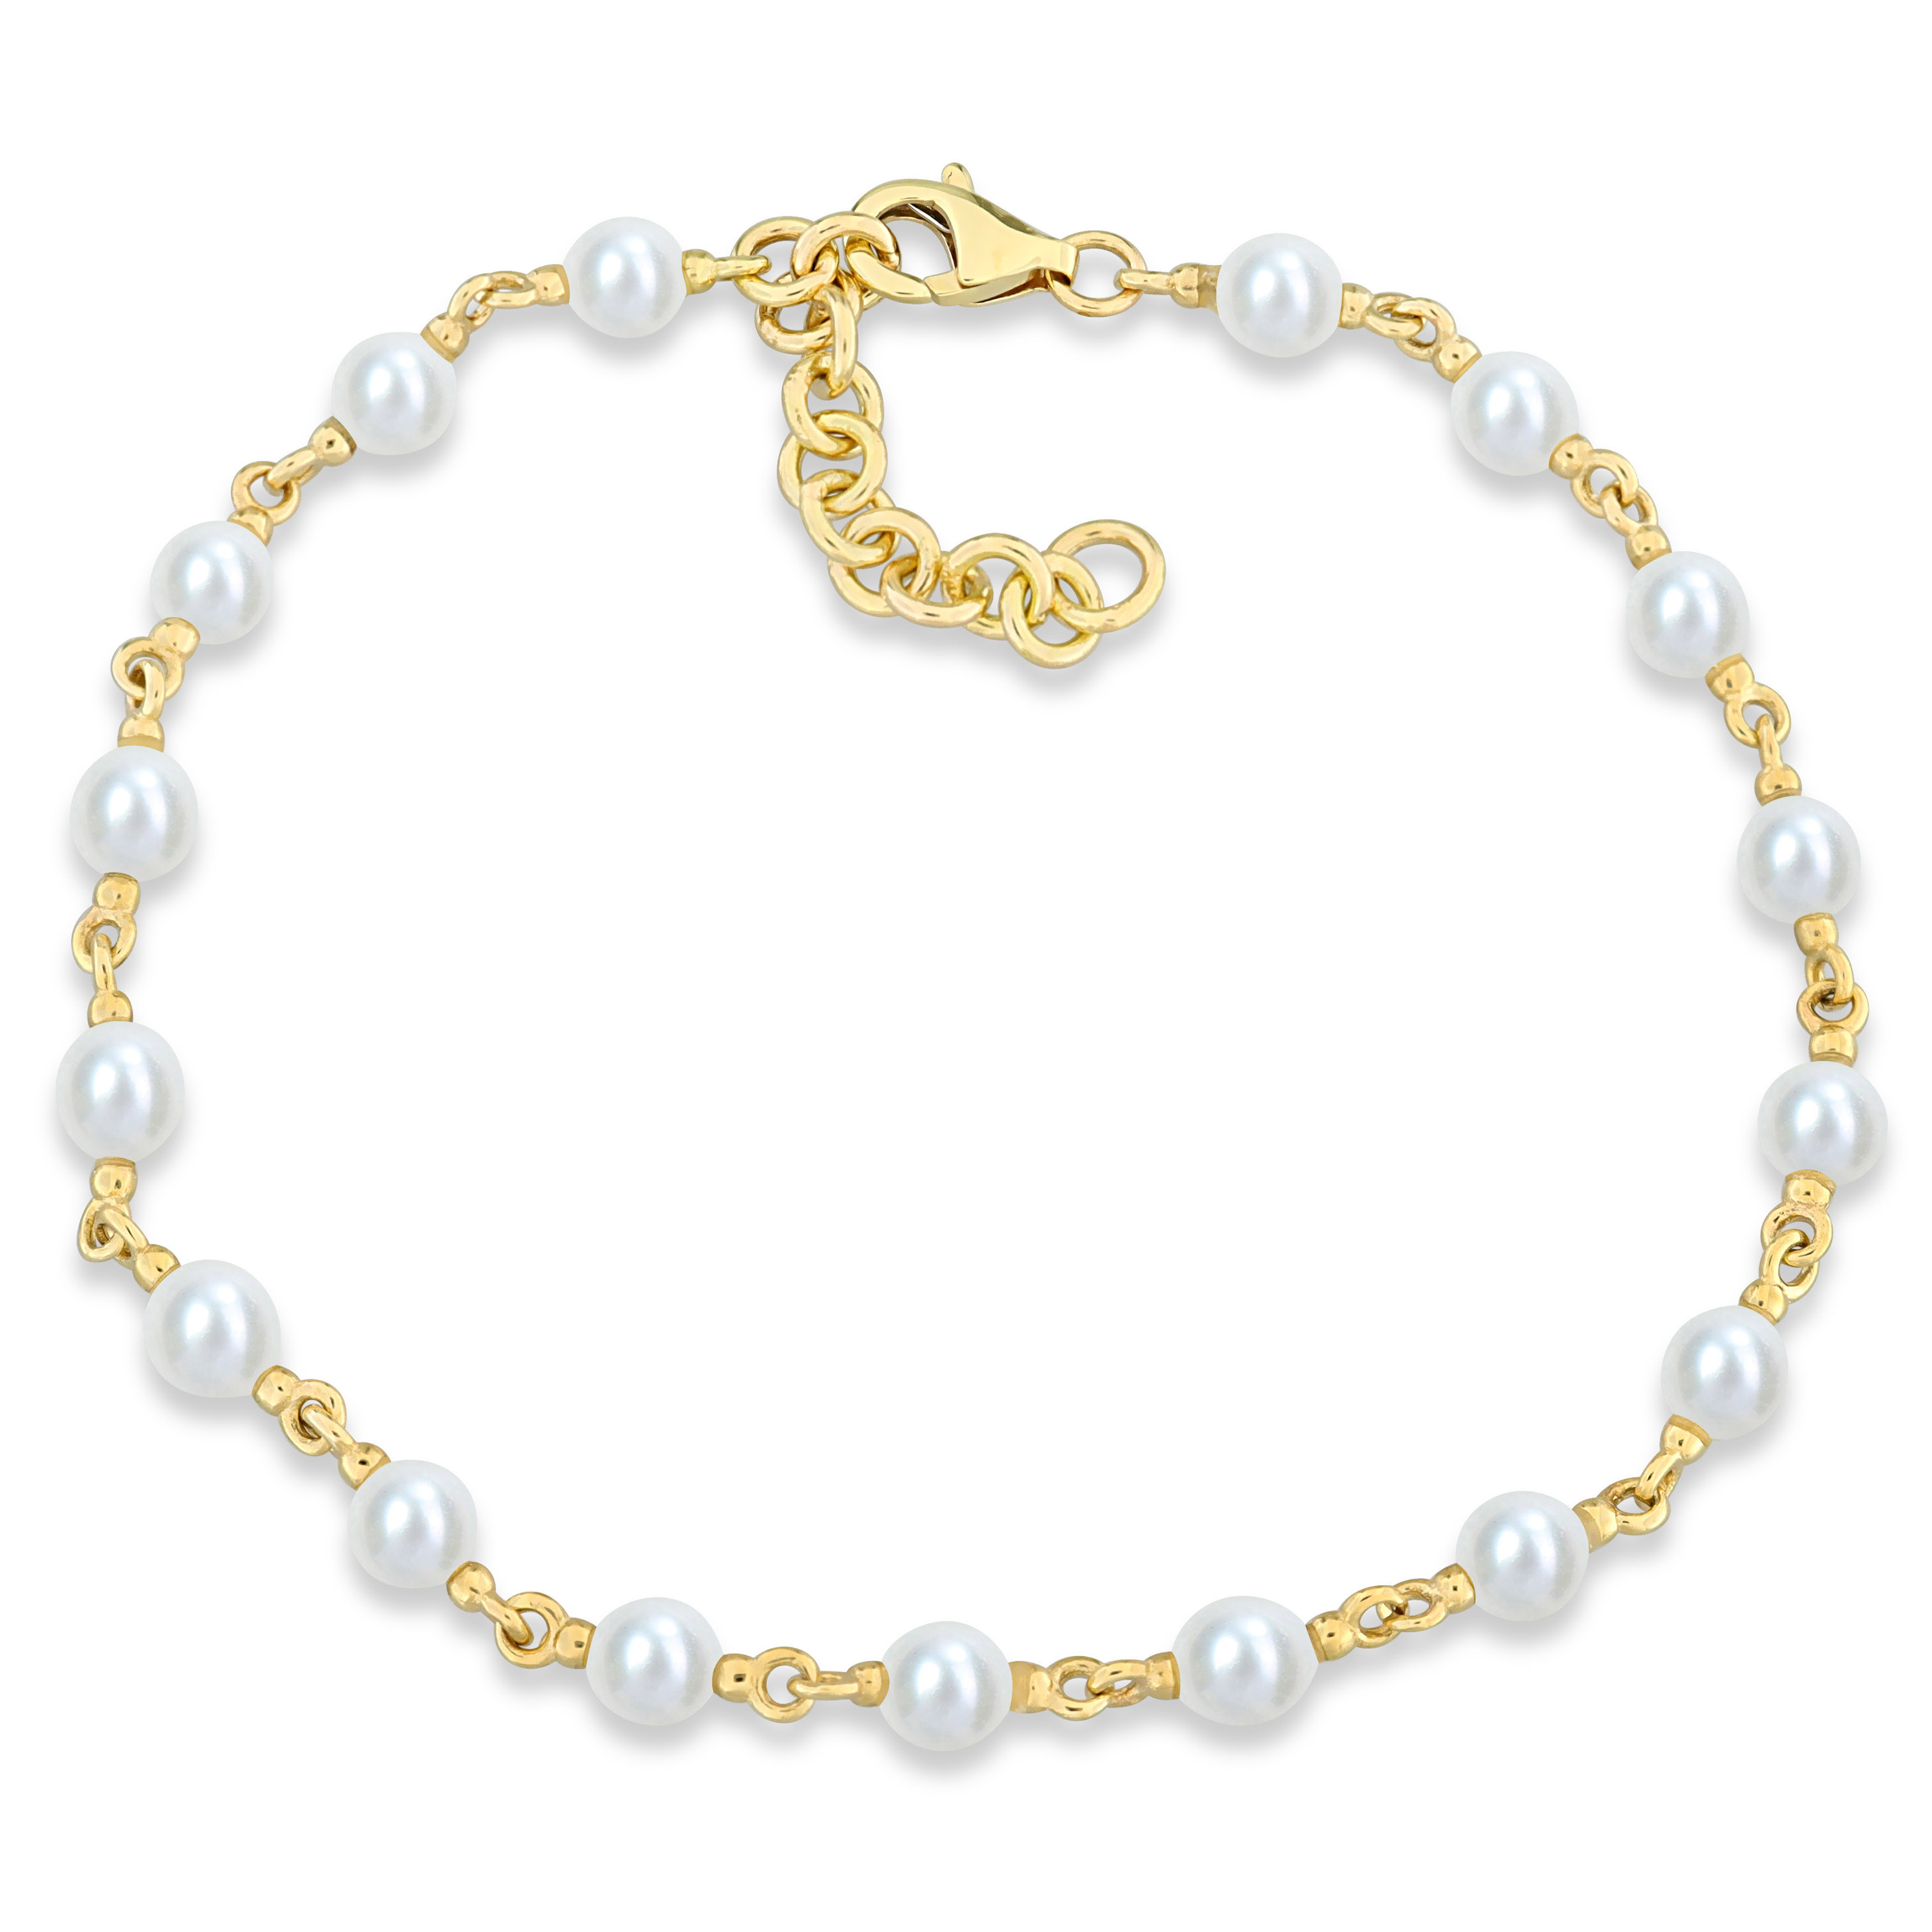 3.5-4mm Cultured Freshwater Pearl Station Bracelet in 10k Yellow Gold - 7.25 in.